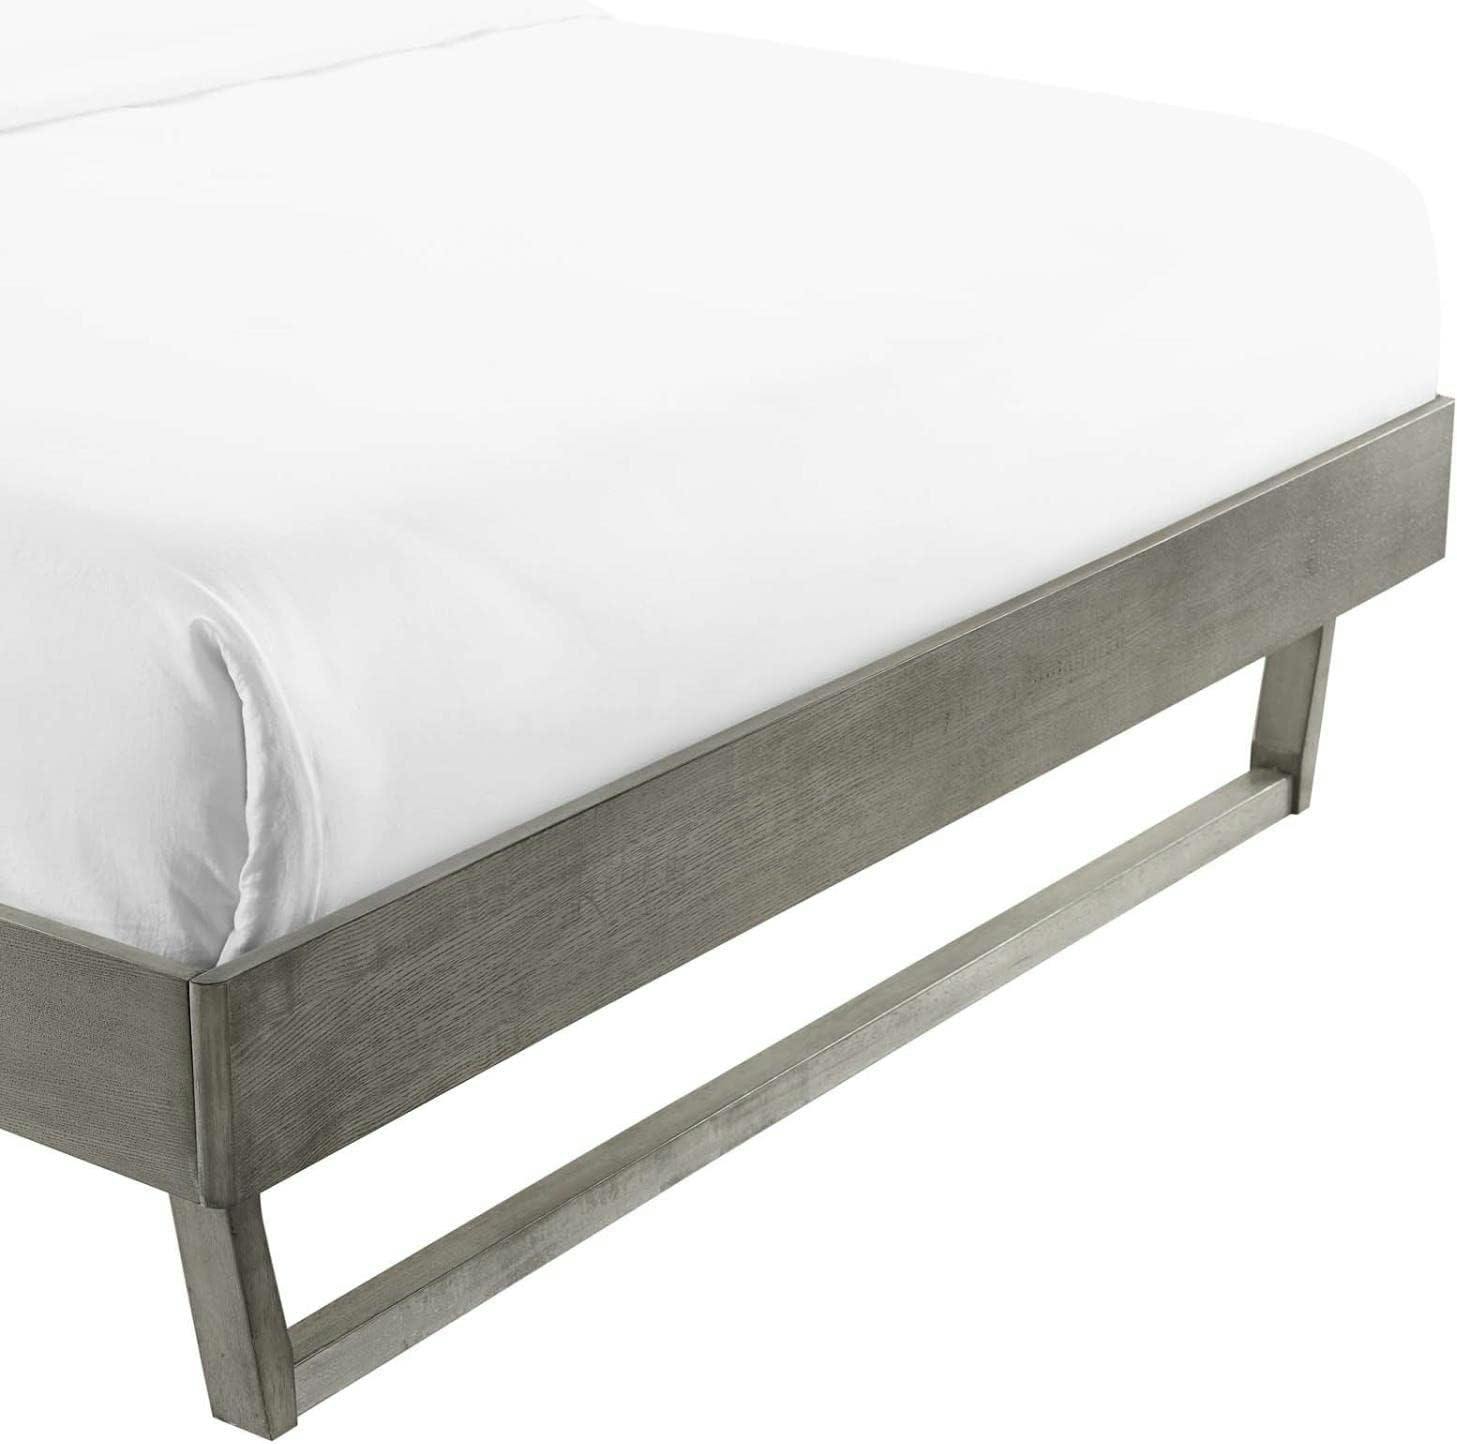 Mid-Century Modern Gray Full Platform Bed with Wood Frame and Headboard